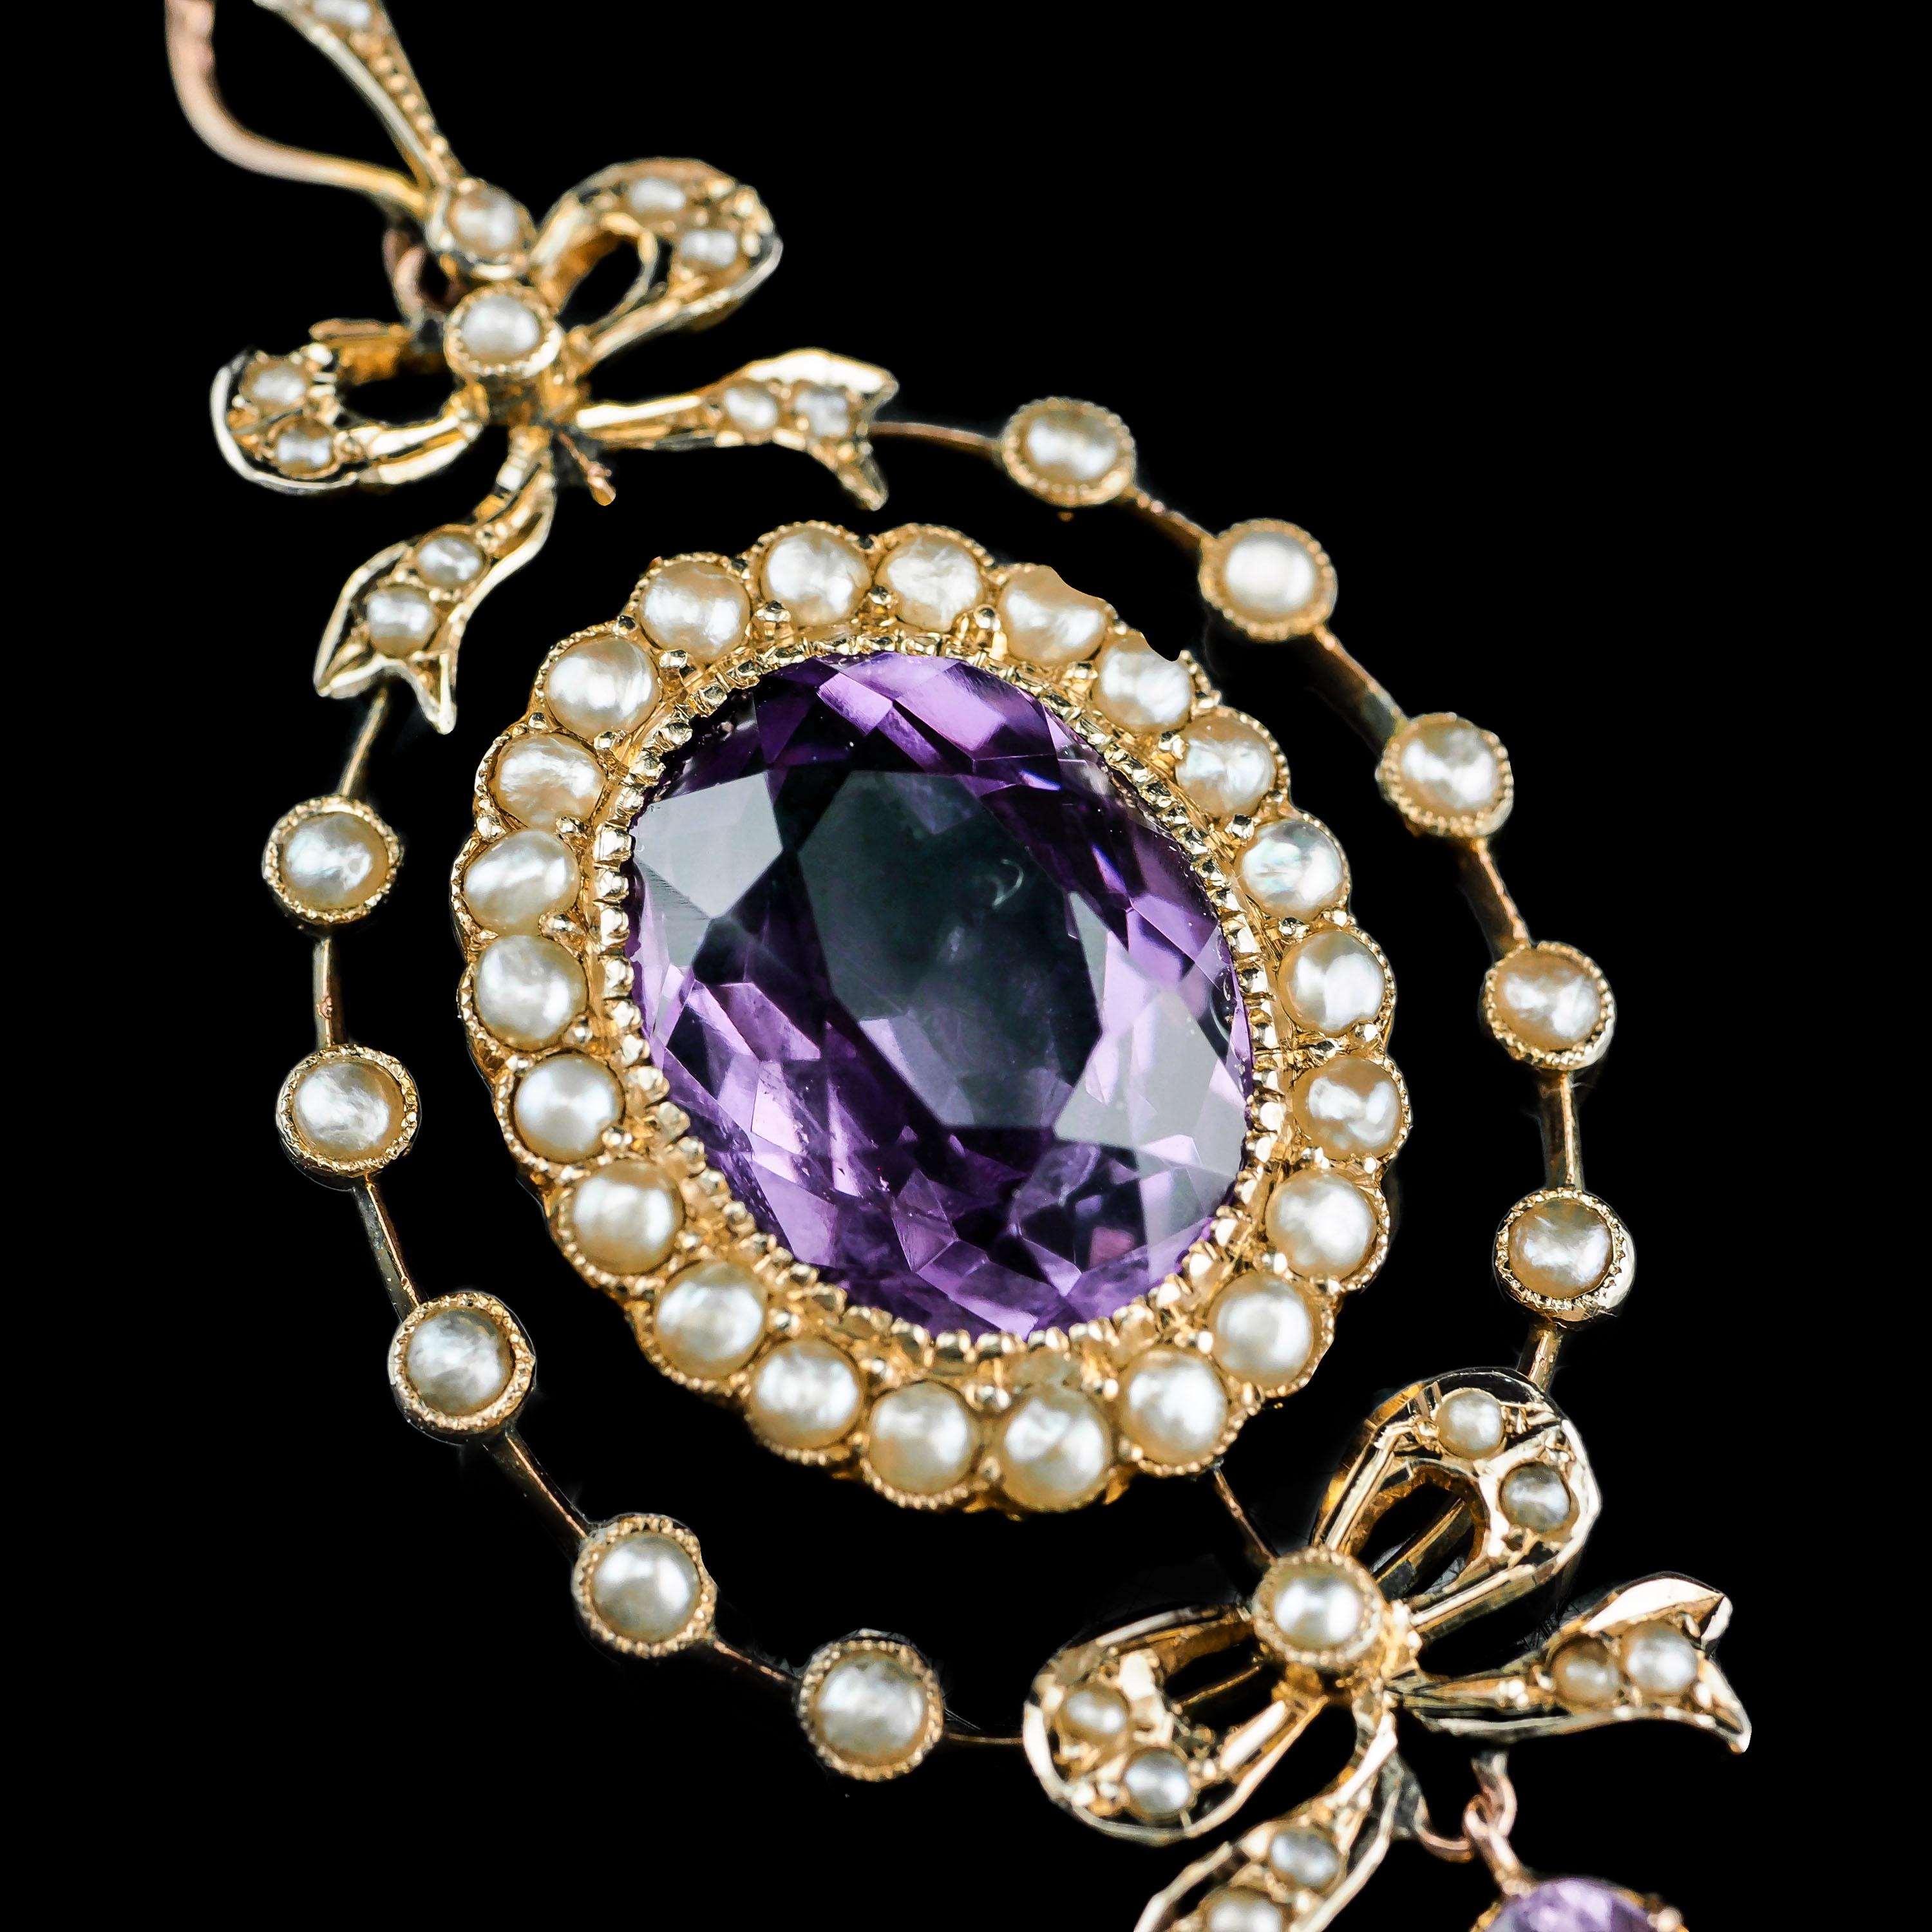 Antique Edwardian Amethyst & Seed Pearl 9k Gold Necklace Pendant, circa 1905 6